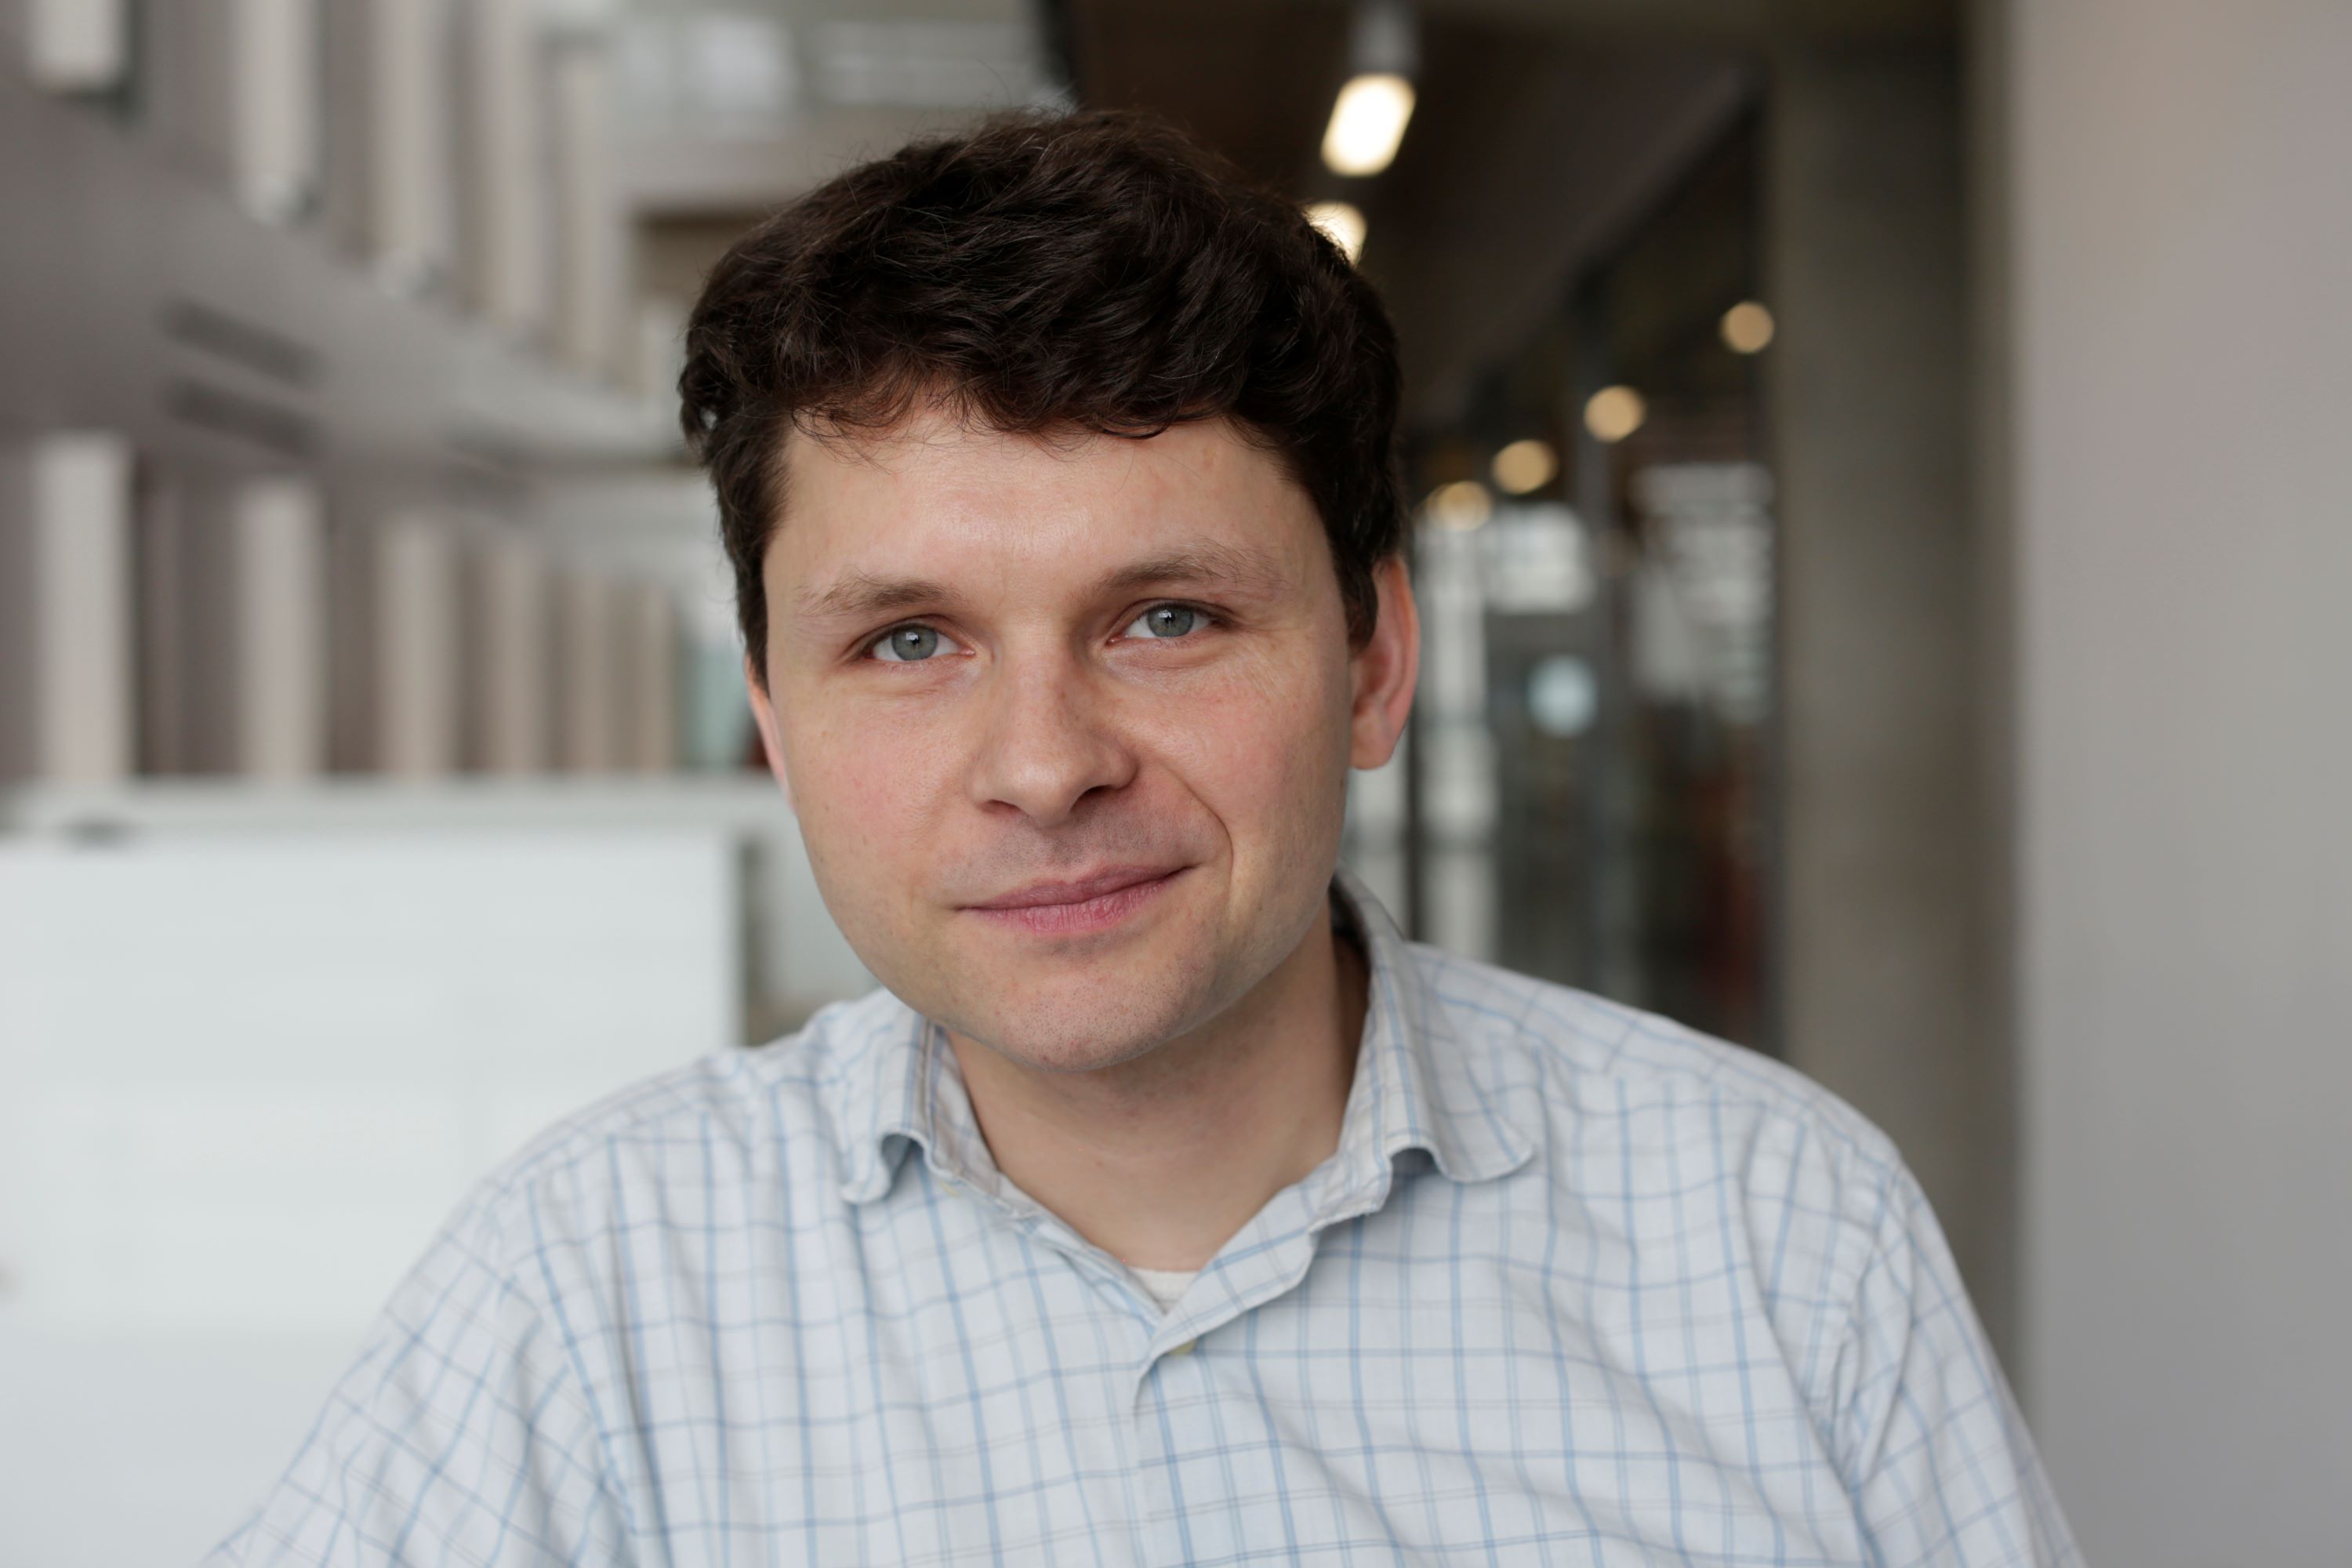 Dr Holger Kramer, with brown hair and blue eyes wearing a white checked shirt, photographed in front of a blurred background.